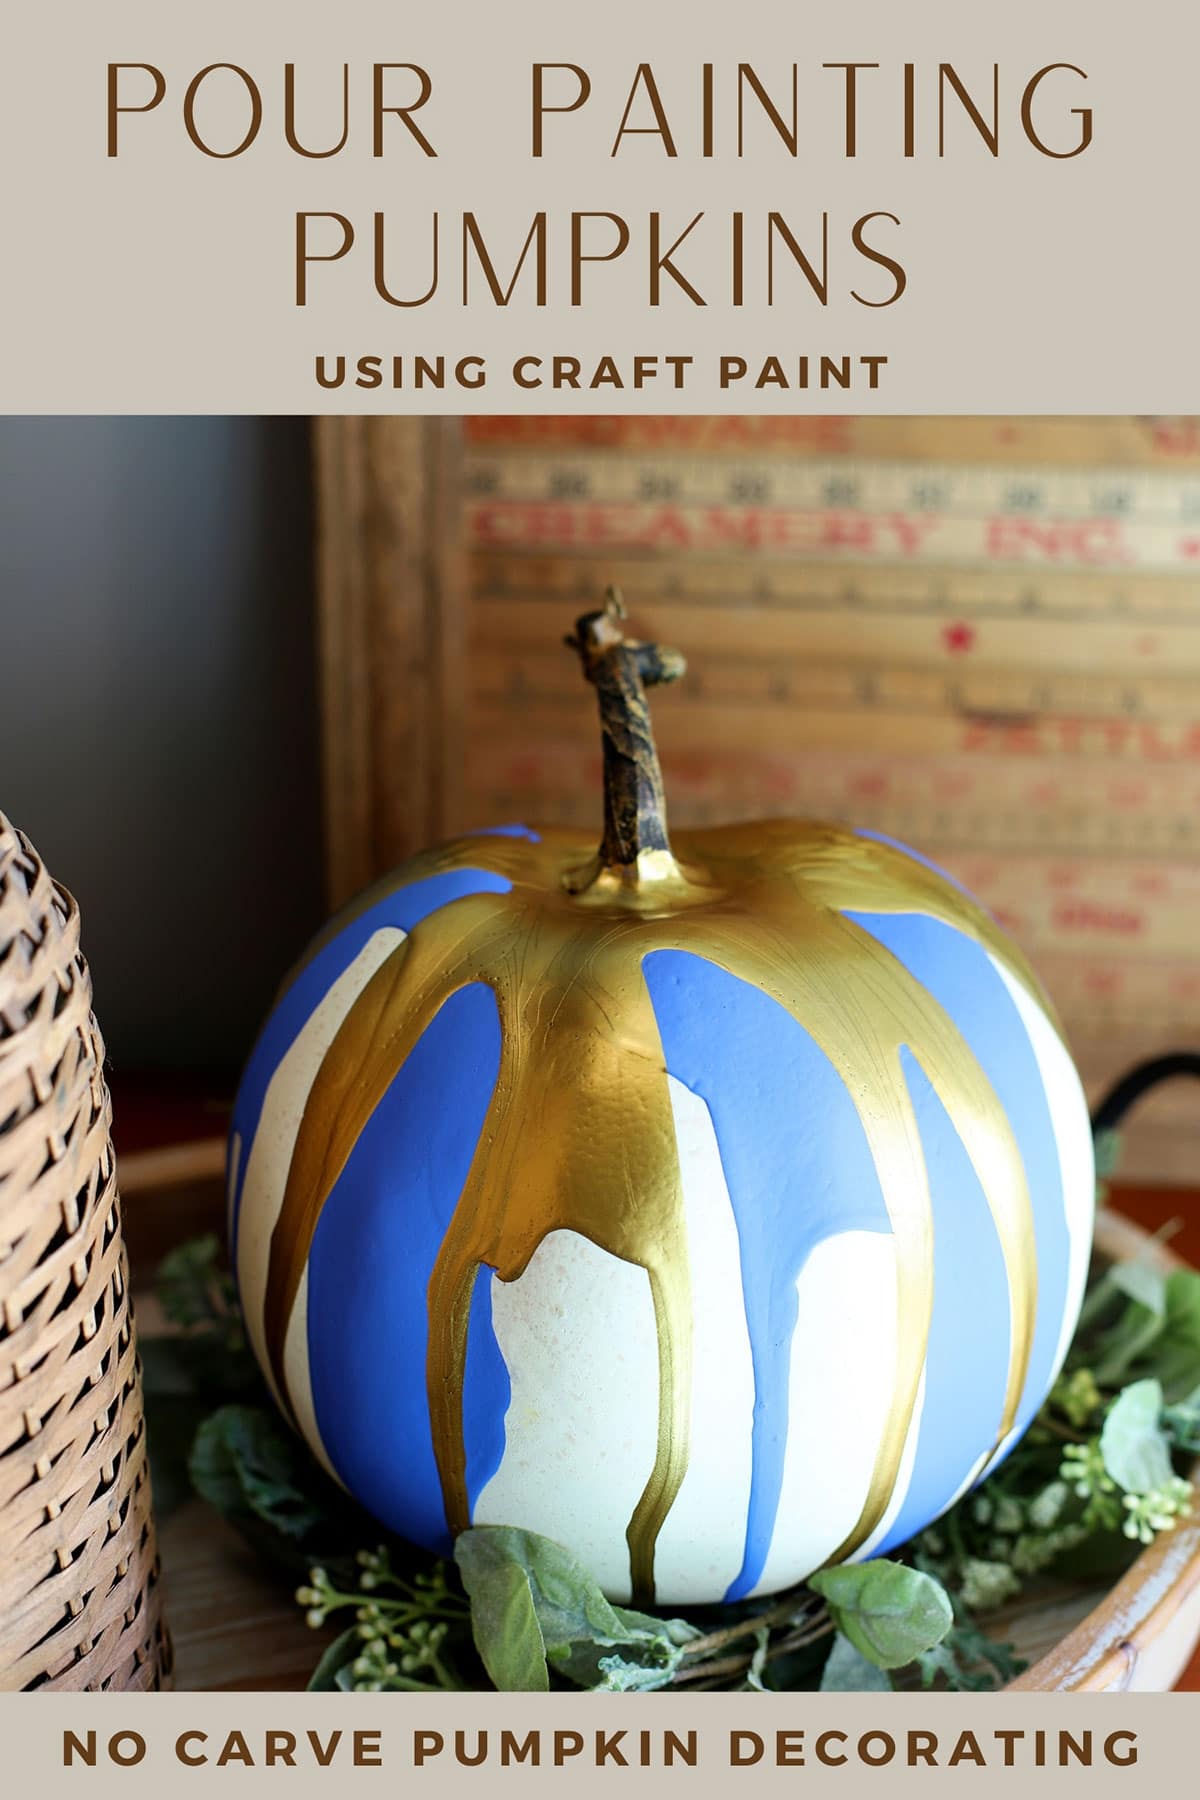 Pour painting a pumpkin for fall decor. 